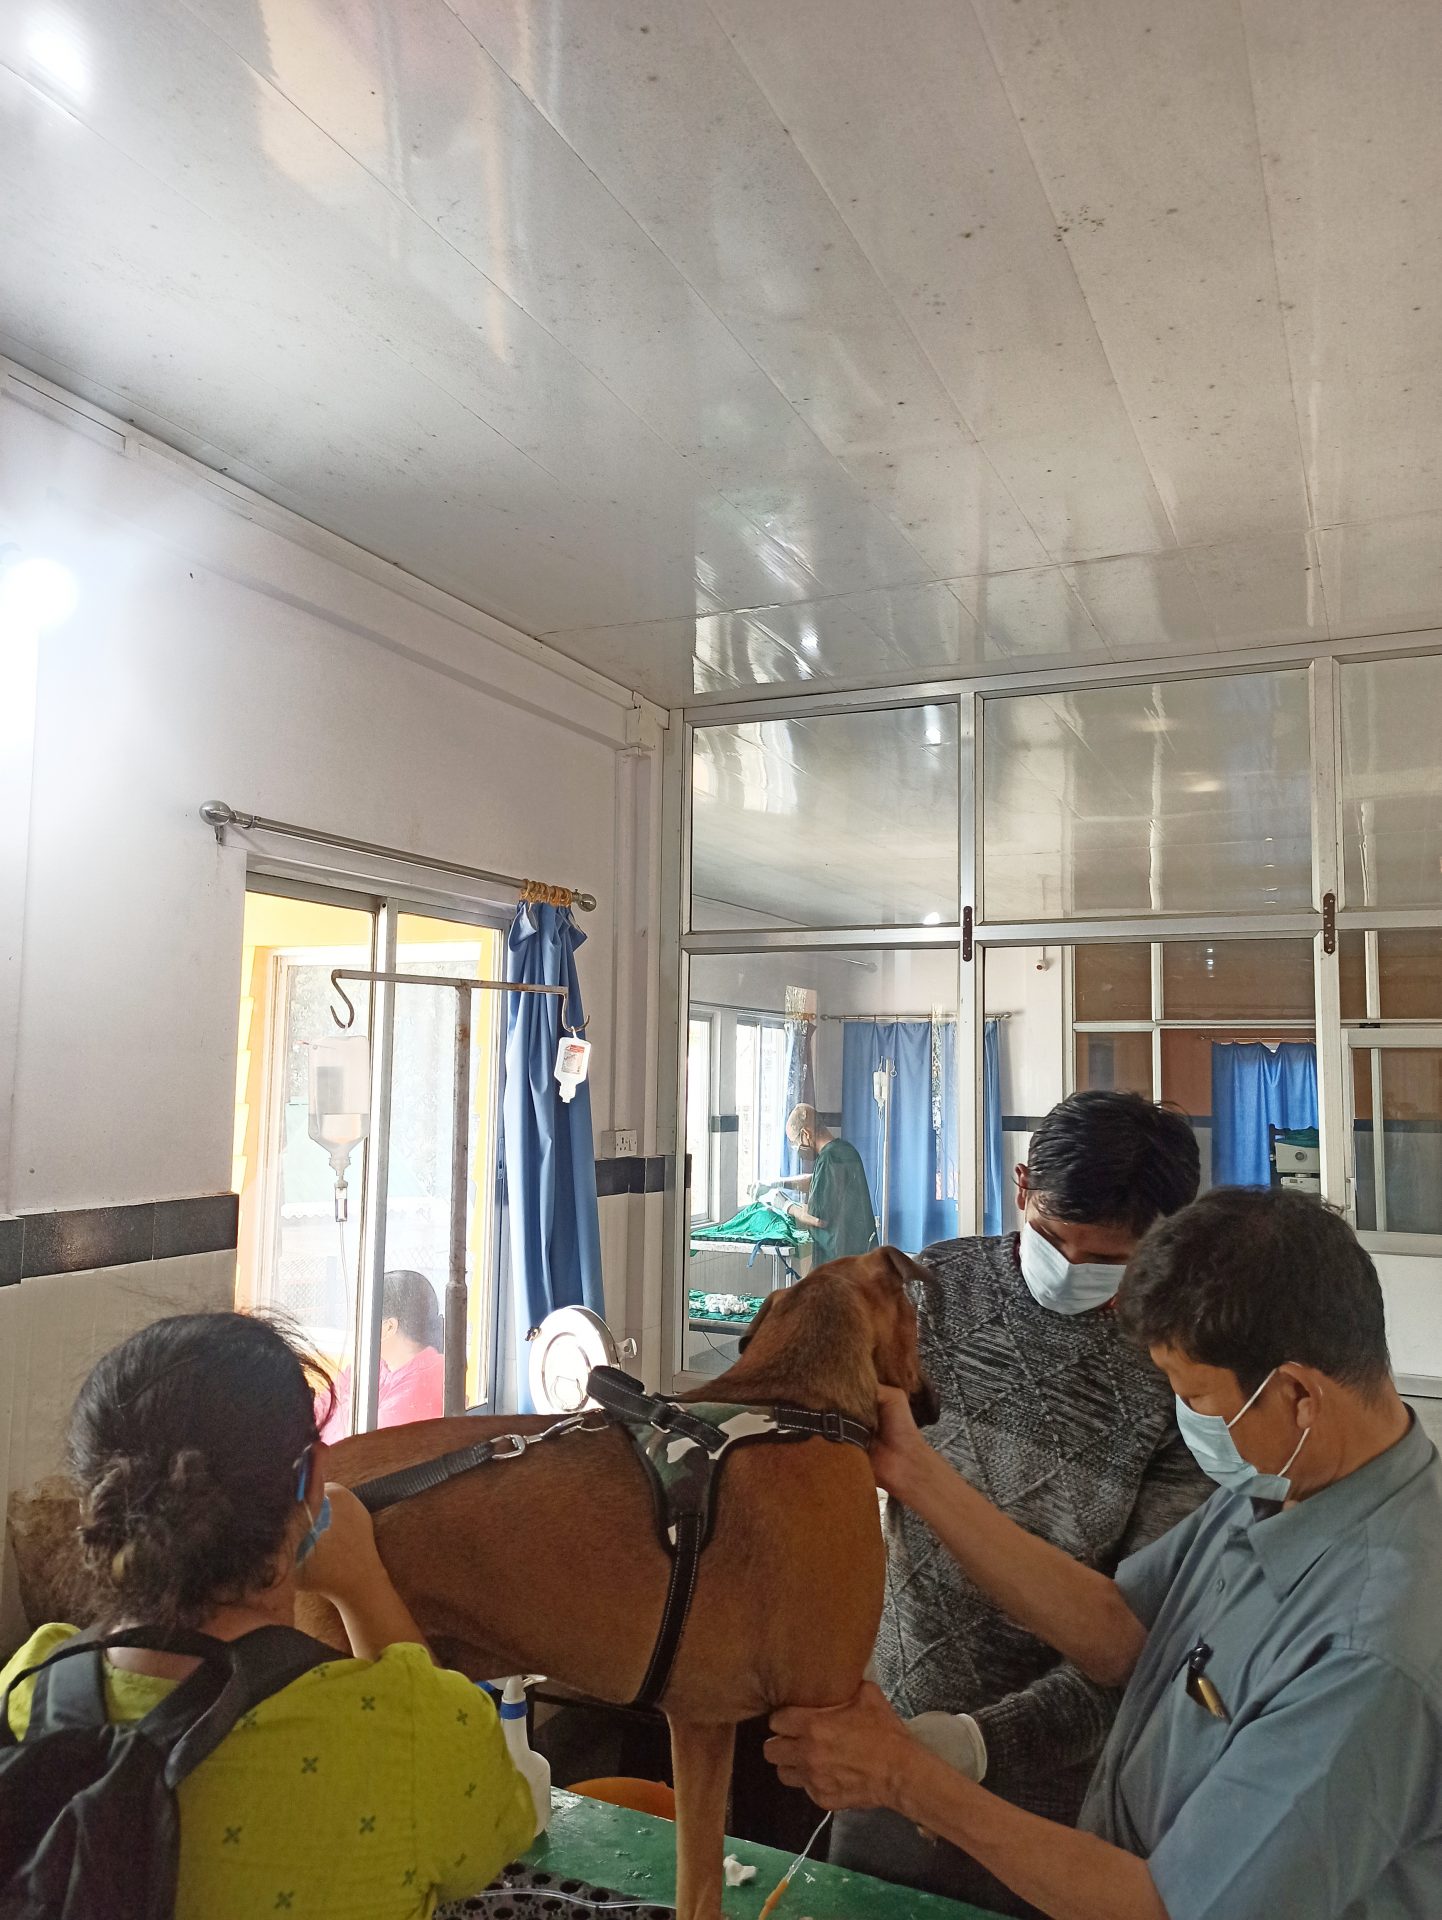 Dog getting prepped for spaying at KAS